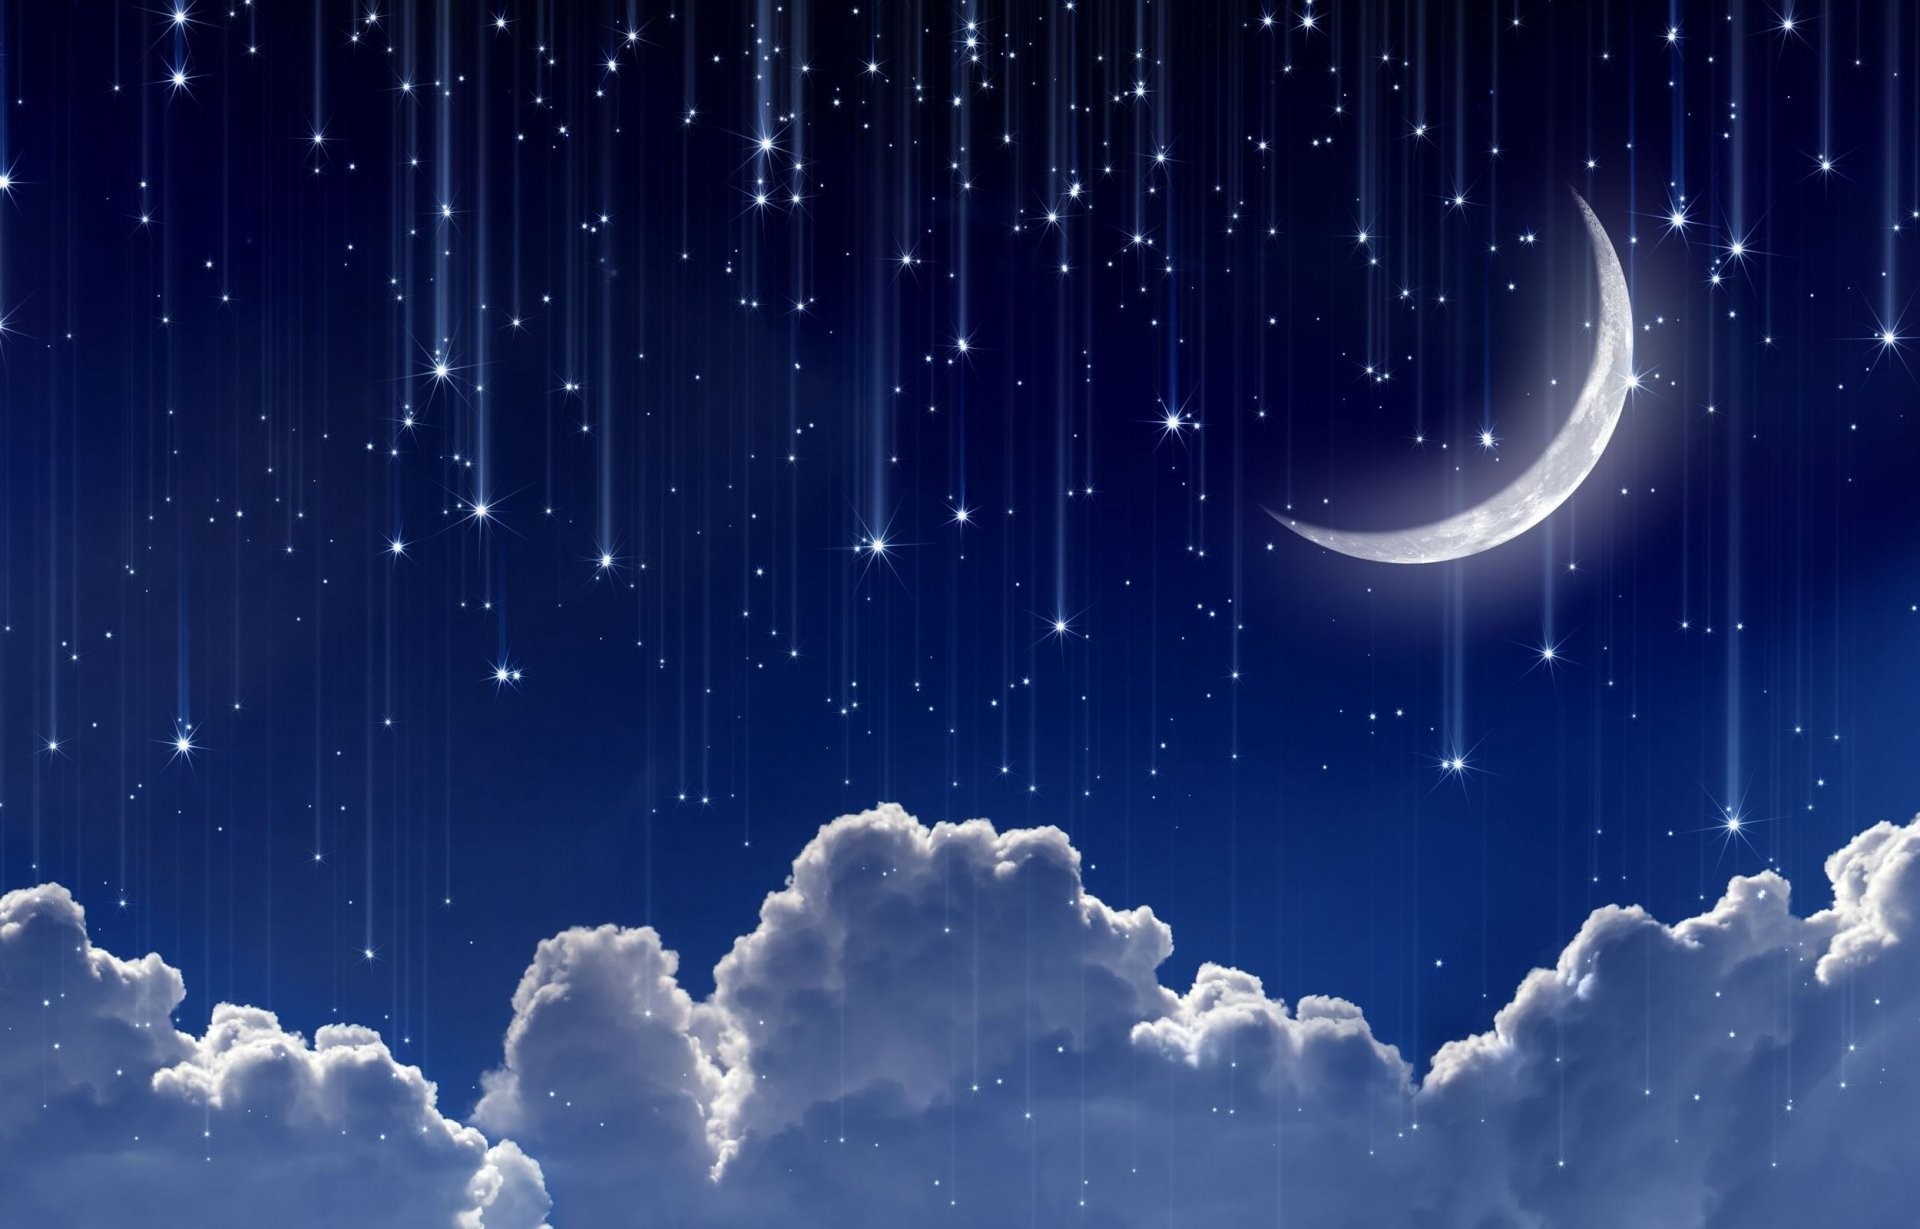 1920x1229 space moon year crescent sky clouds star stars lights night background  wallpaper widescreen full screen hd